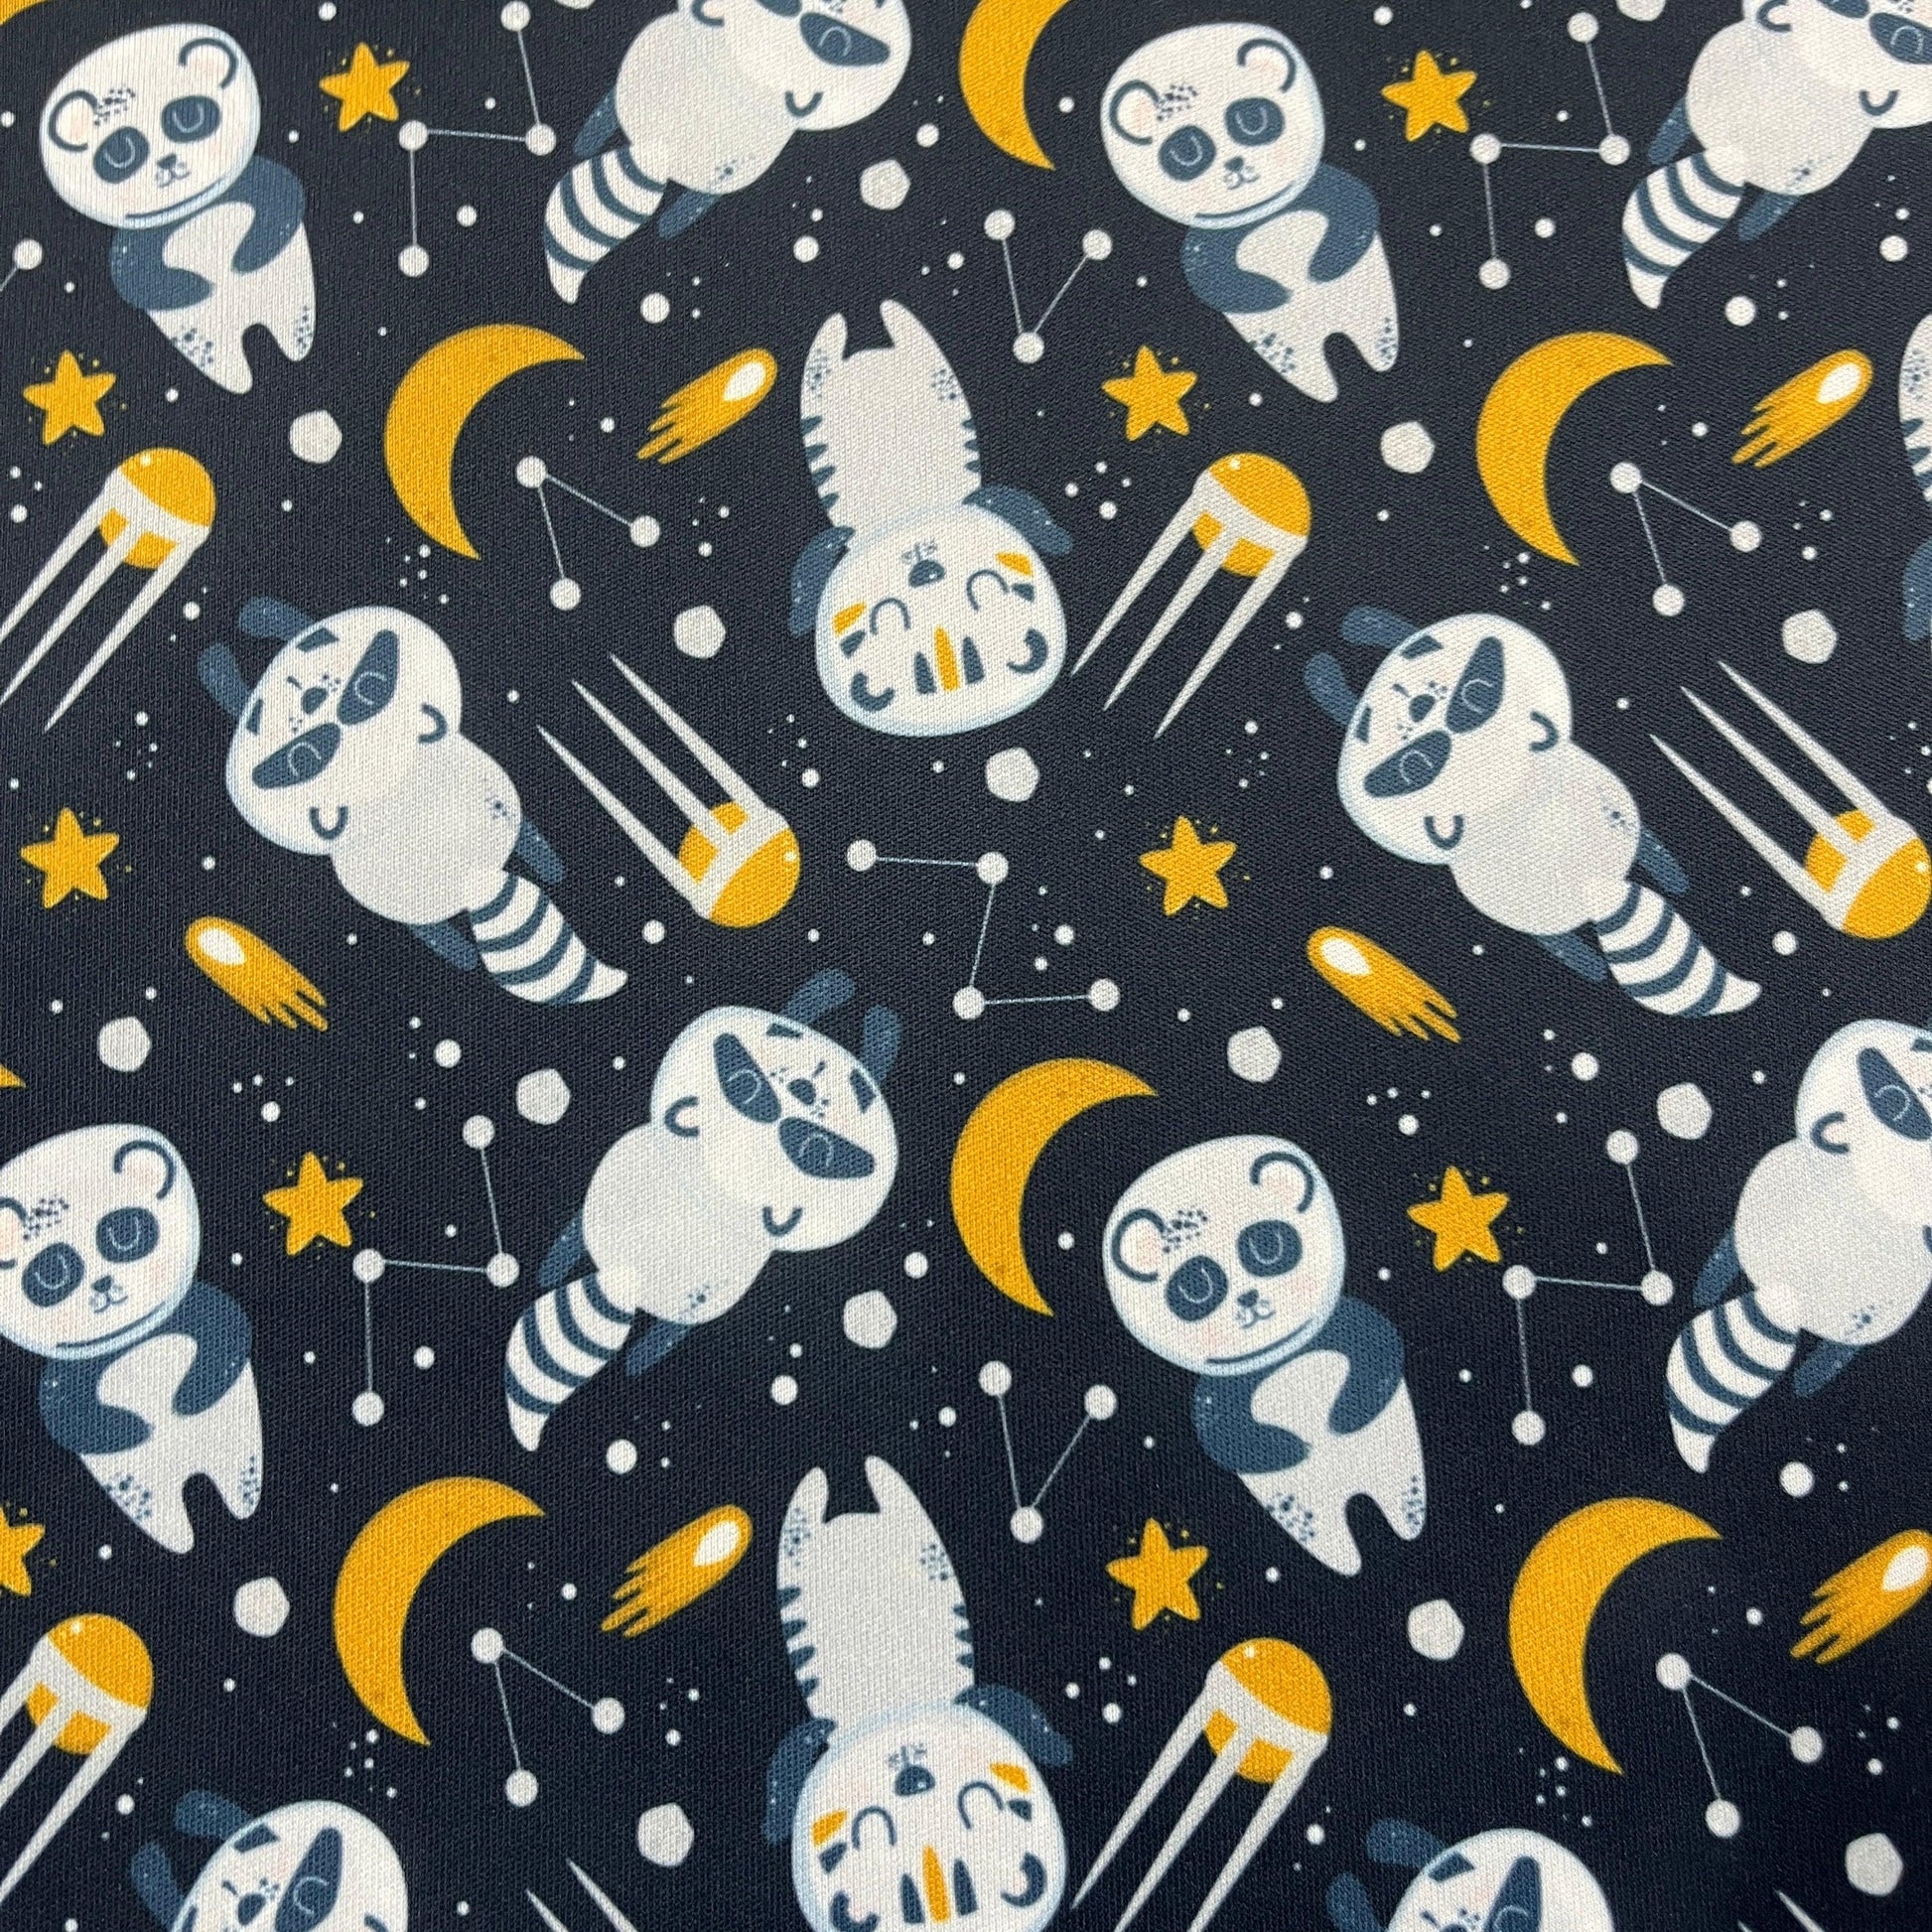 Space Creatures on Navy 1 mil PUL Fabric - Made in the USA - Nature's Fabrics